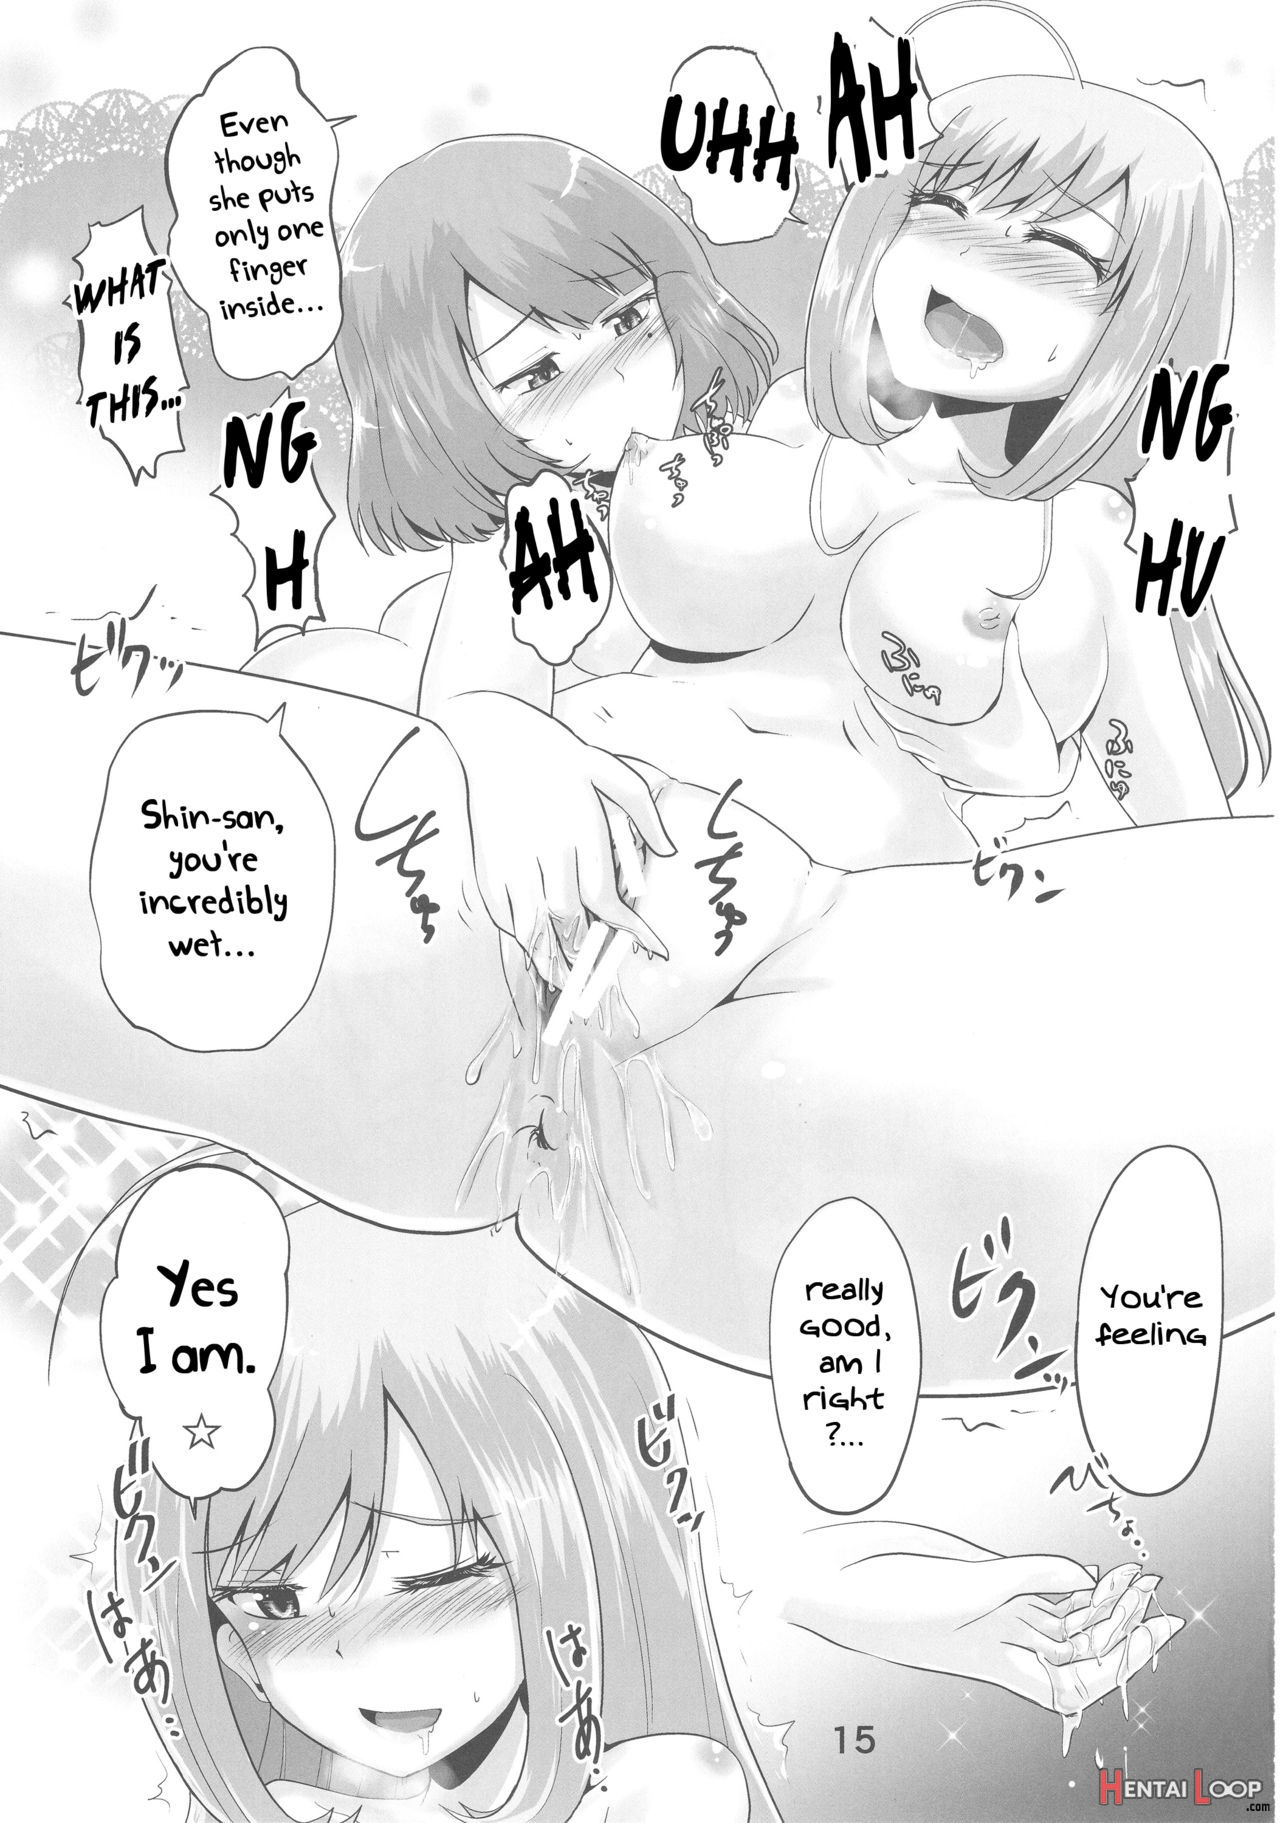 Kaedesan And Shuga Make Out Covered In Pee page 14